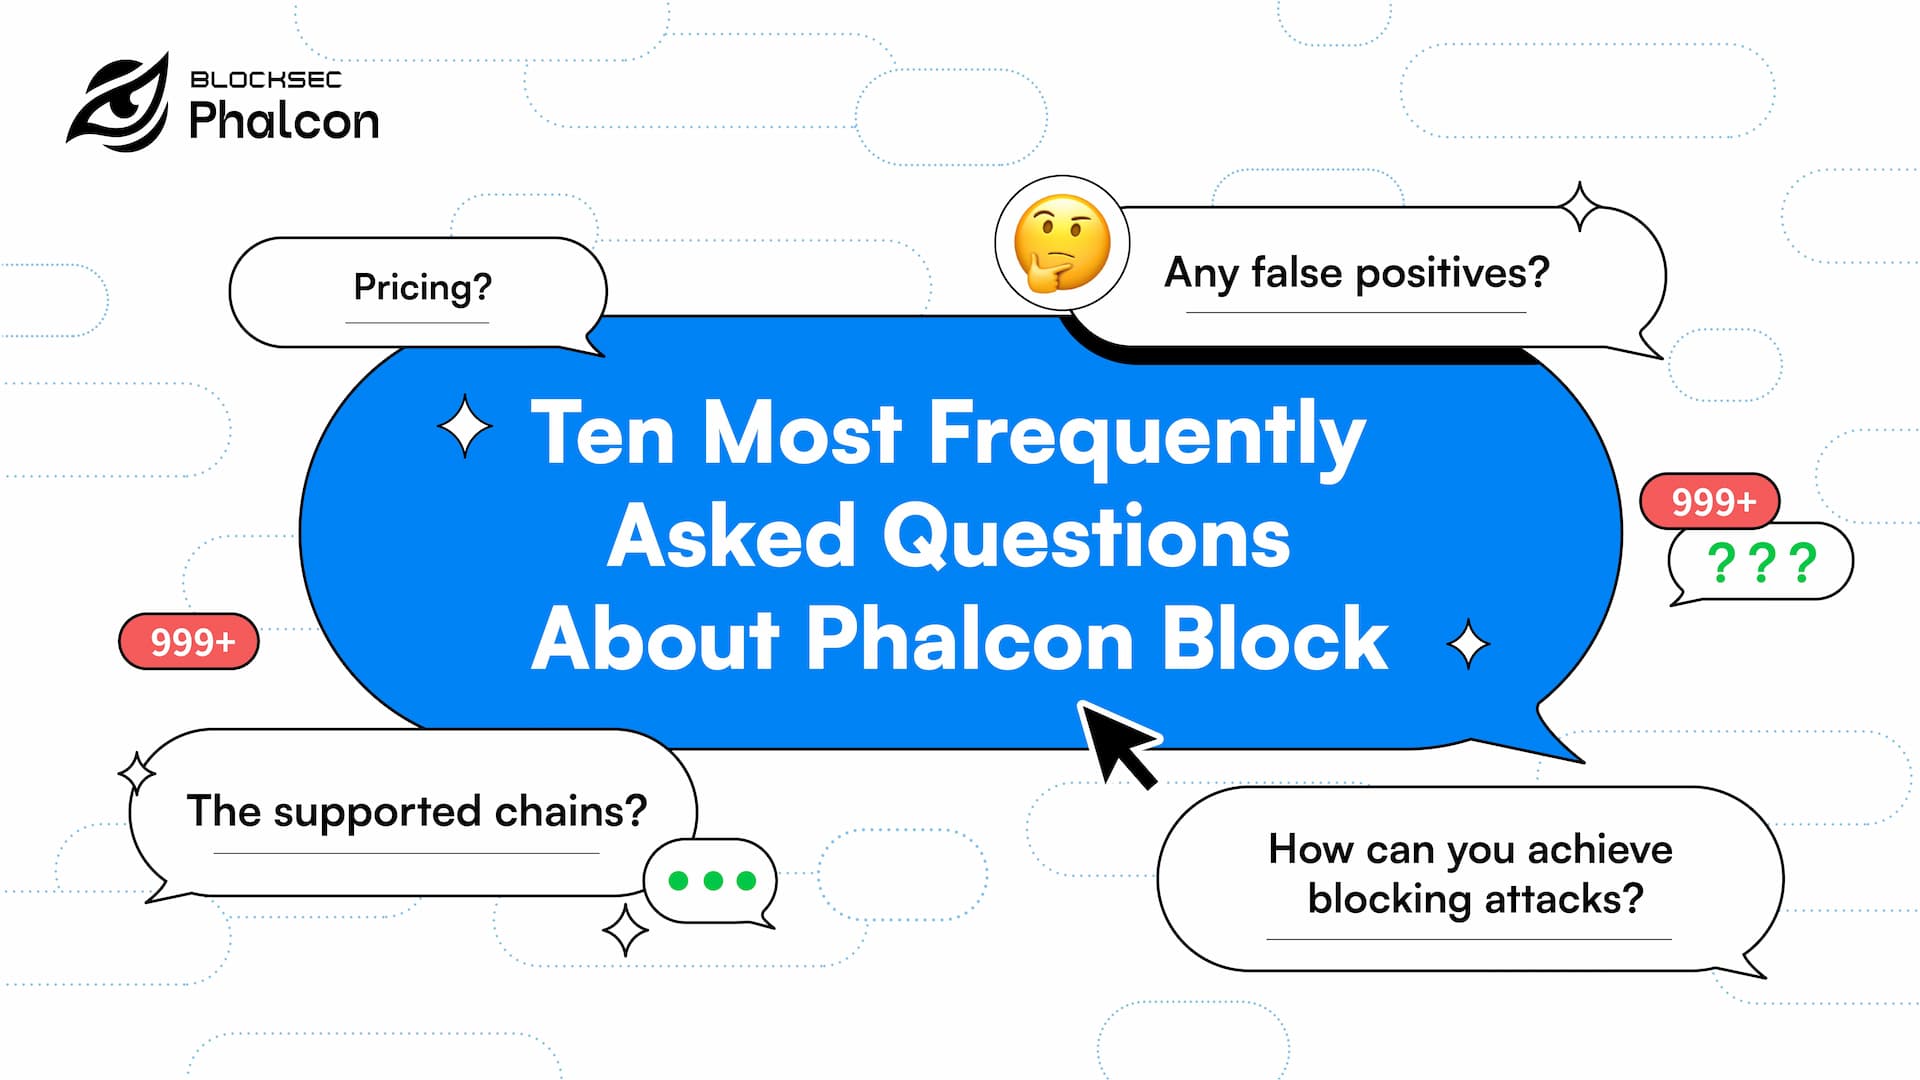 Ten Most Frequently Asked Questions About Phalcon Block